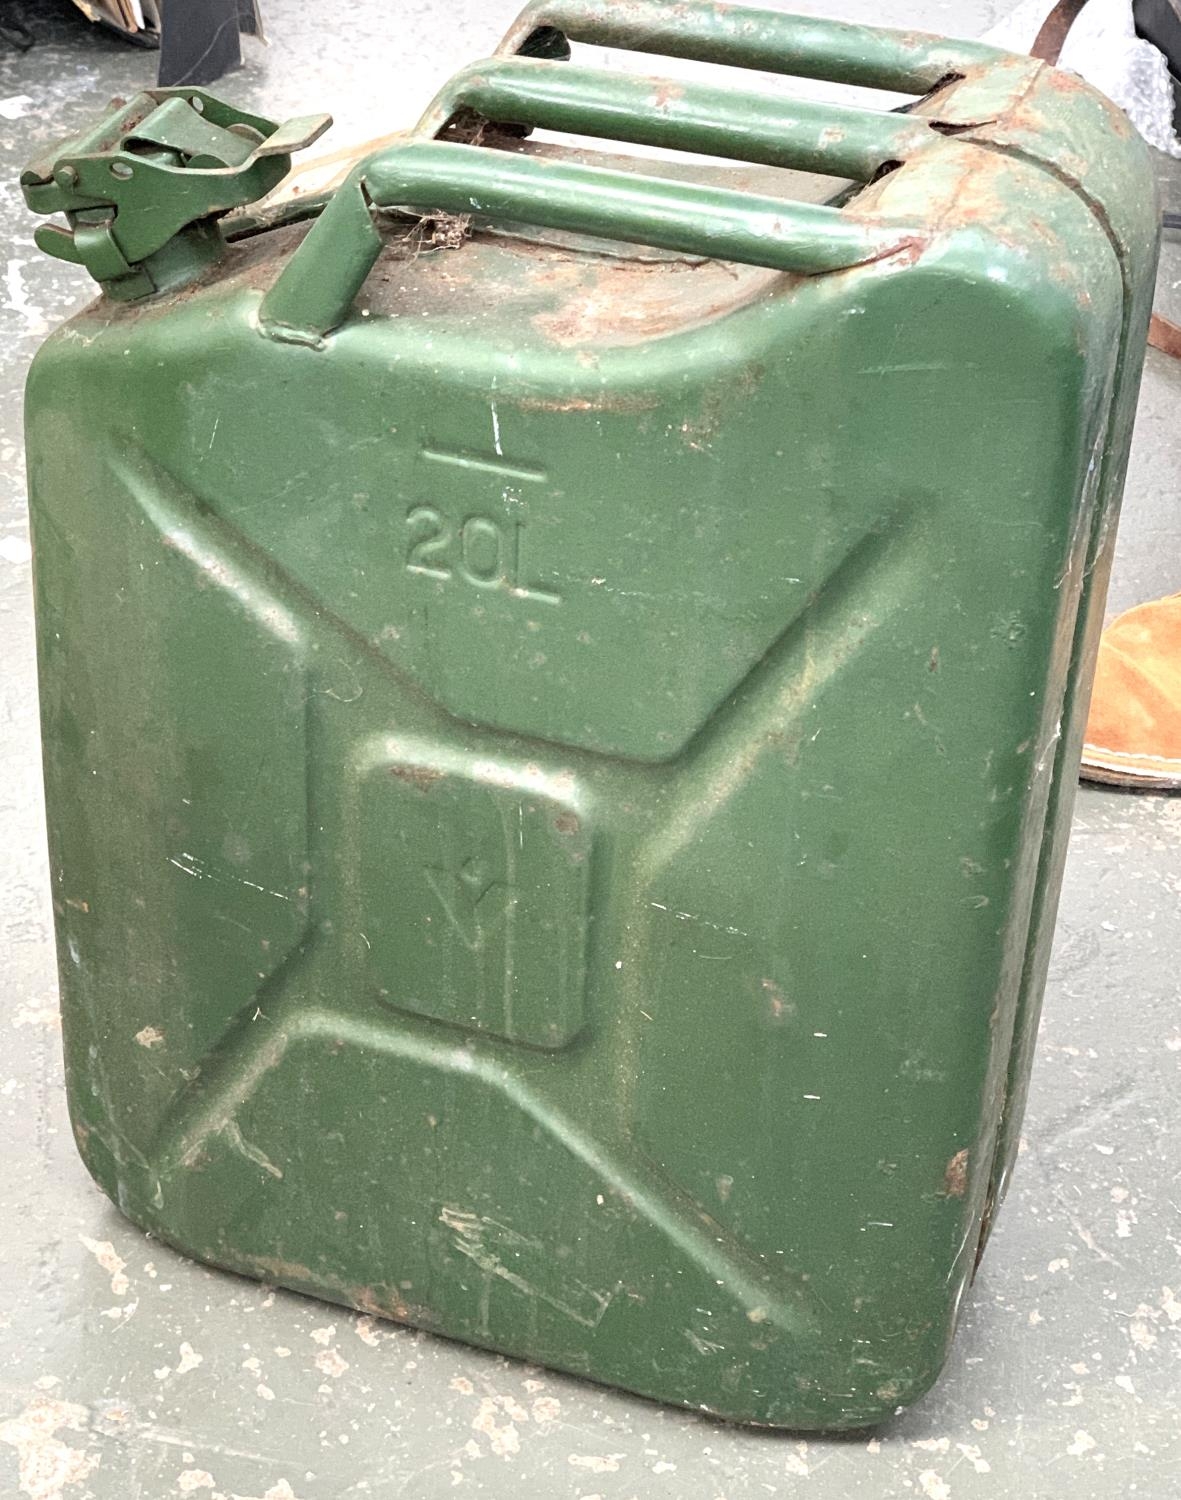 A 20l jerry can